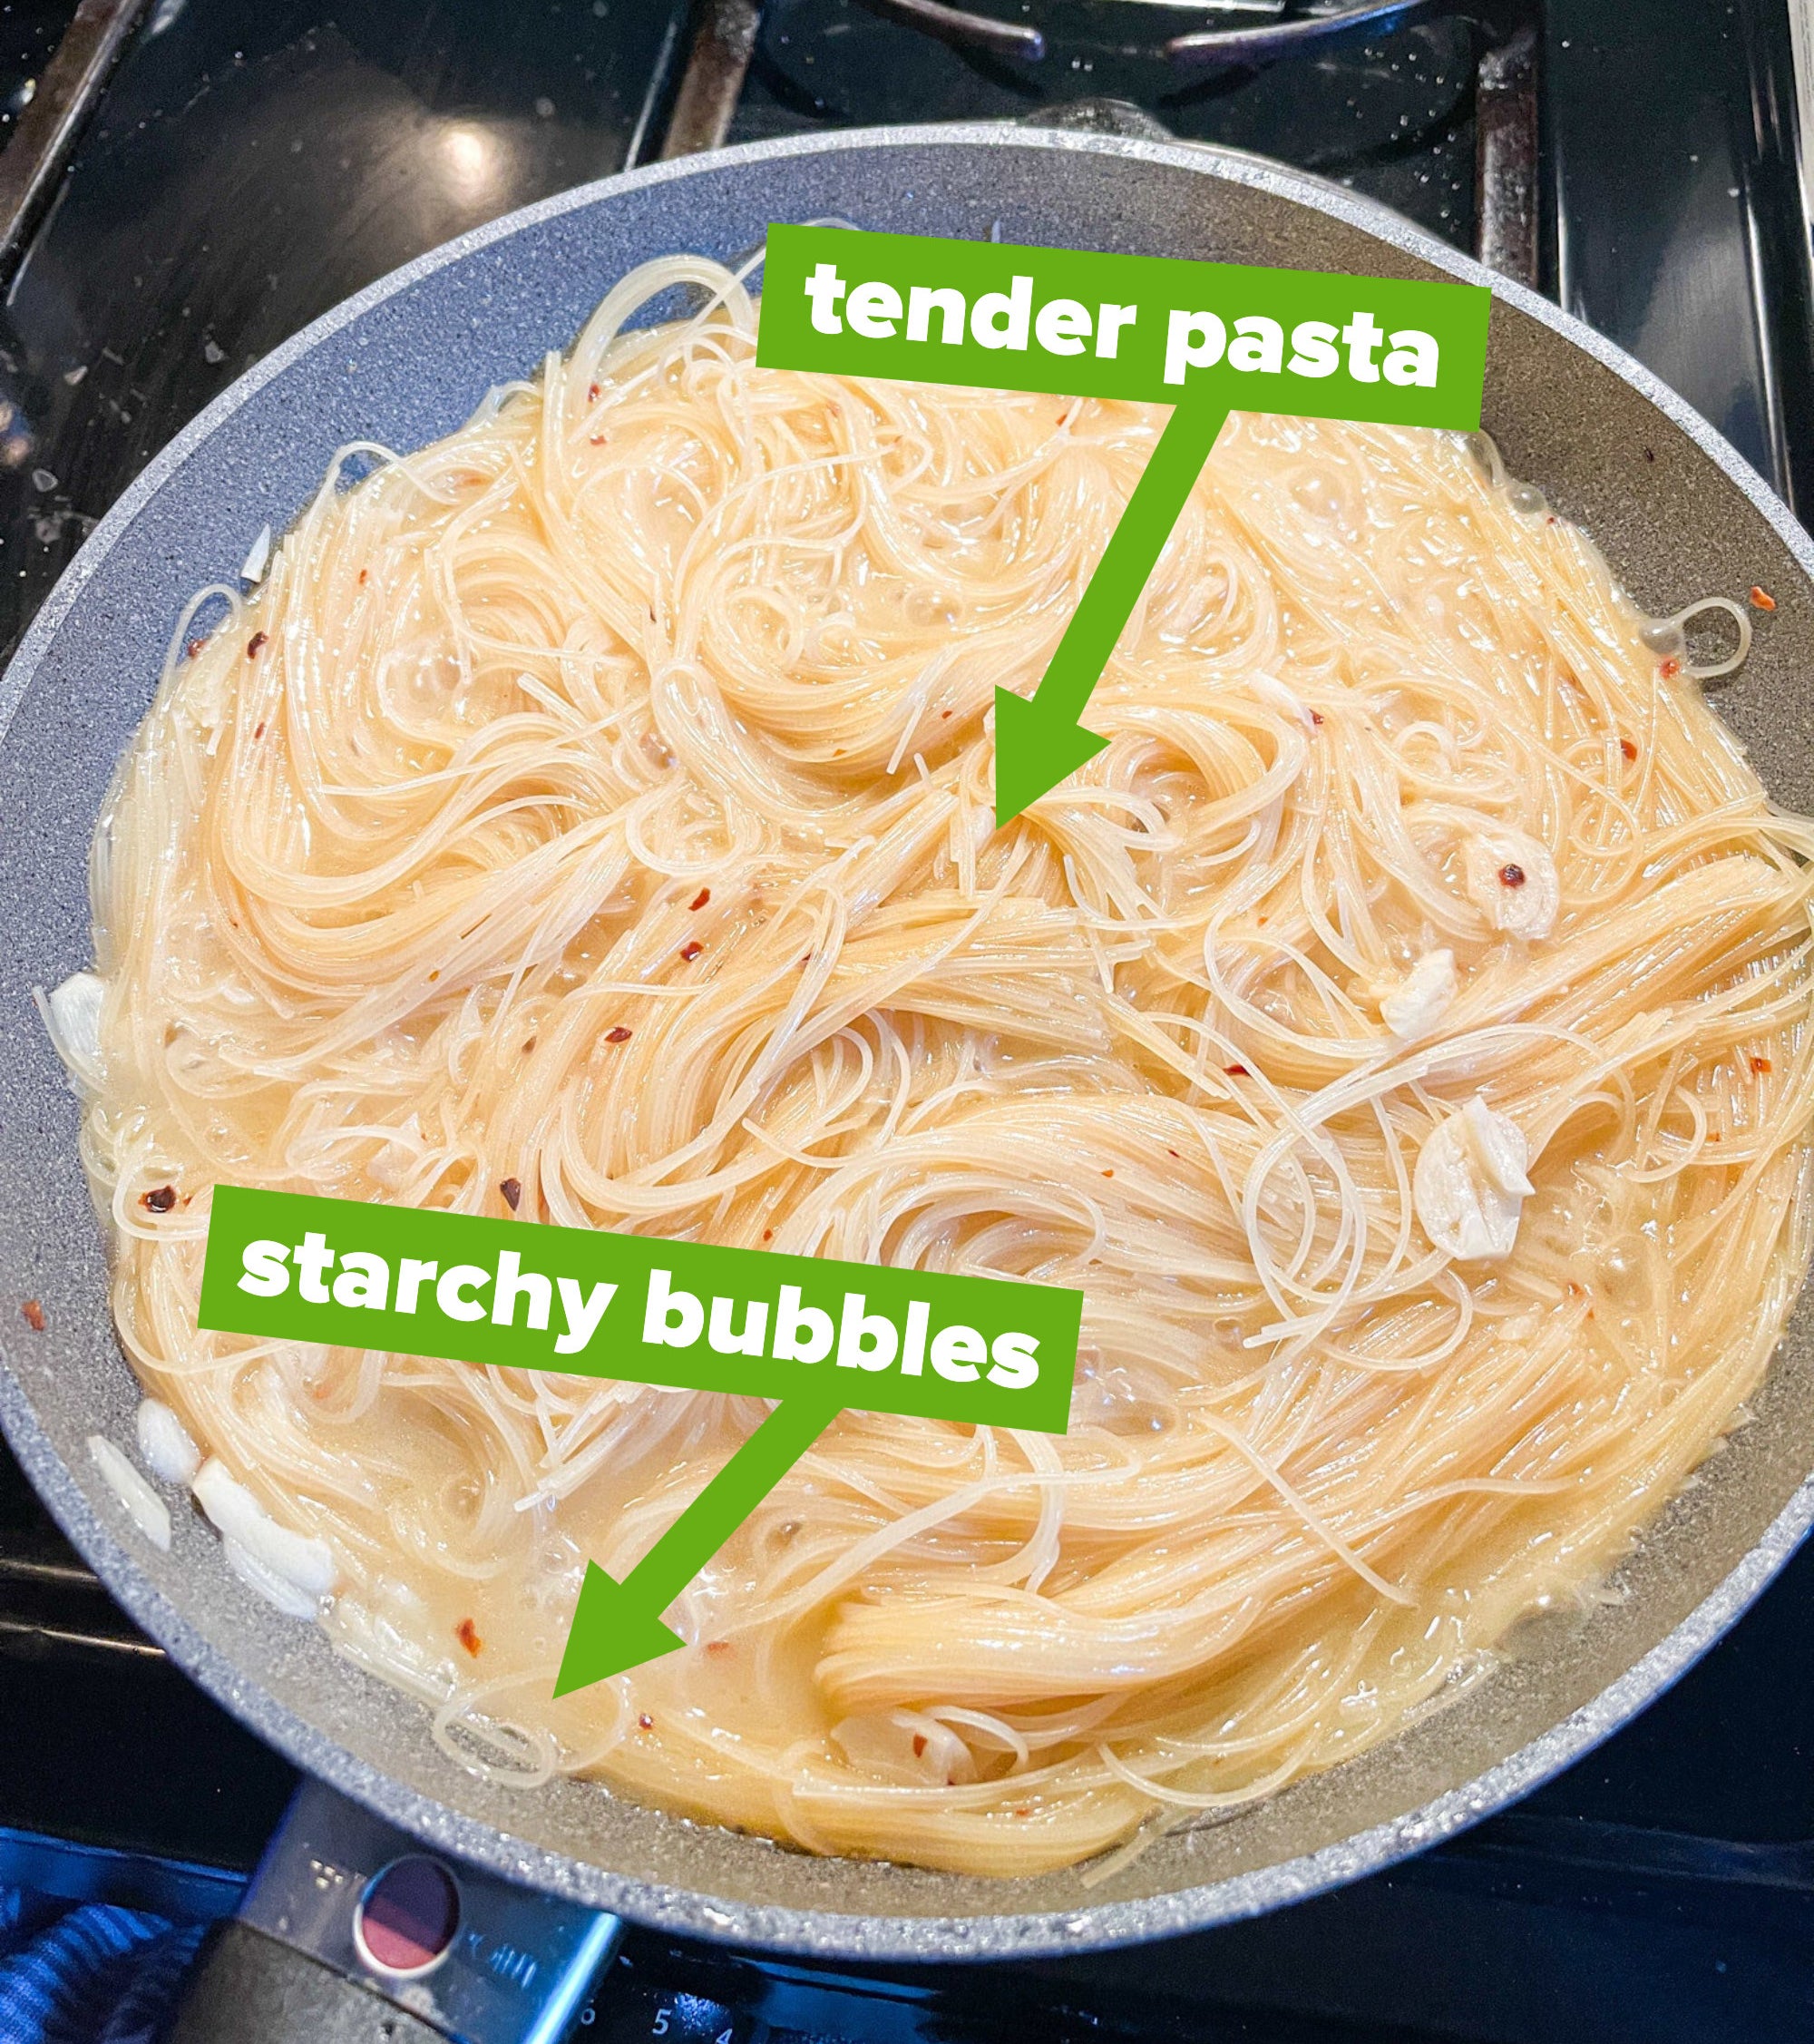 Pasta in pan with captions with arrows to &quot;starchy bubbles&quot; and &quot;tender pasta&quot;